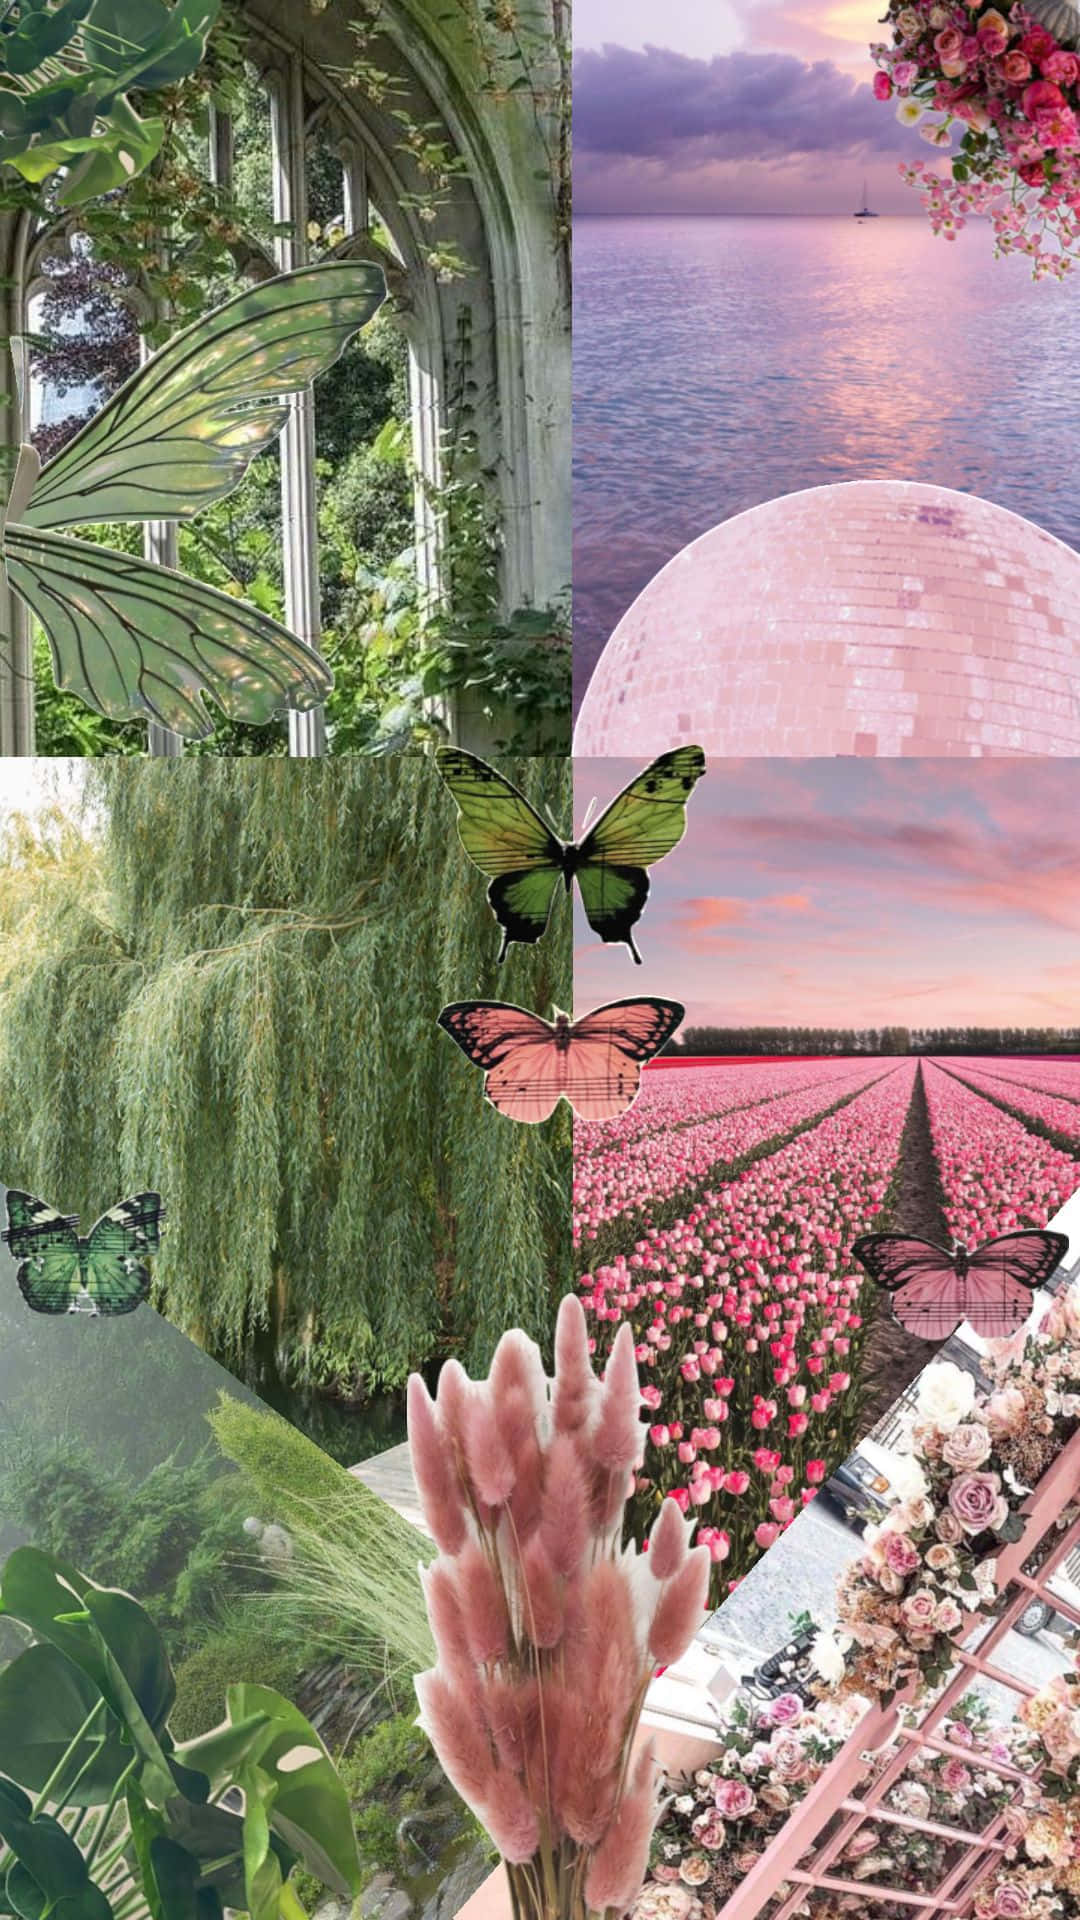 A delightful mix of pink and green together for the perfect aesthetic Wallpaper